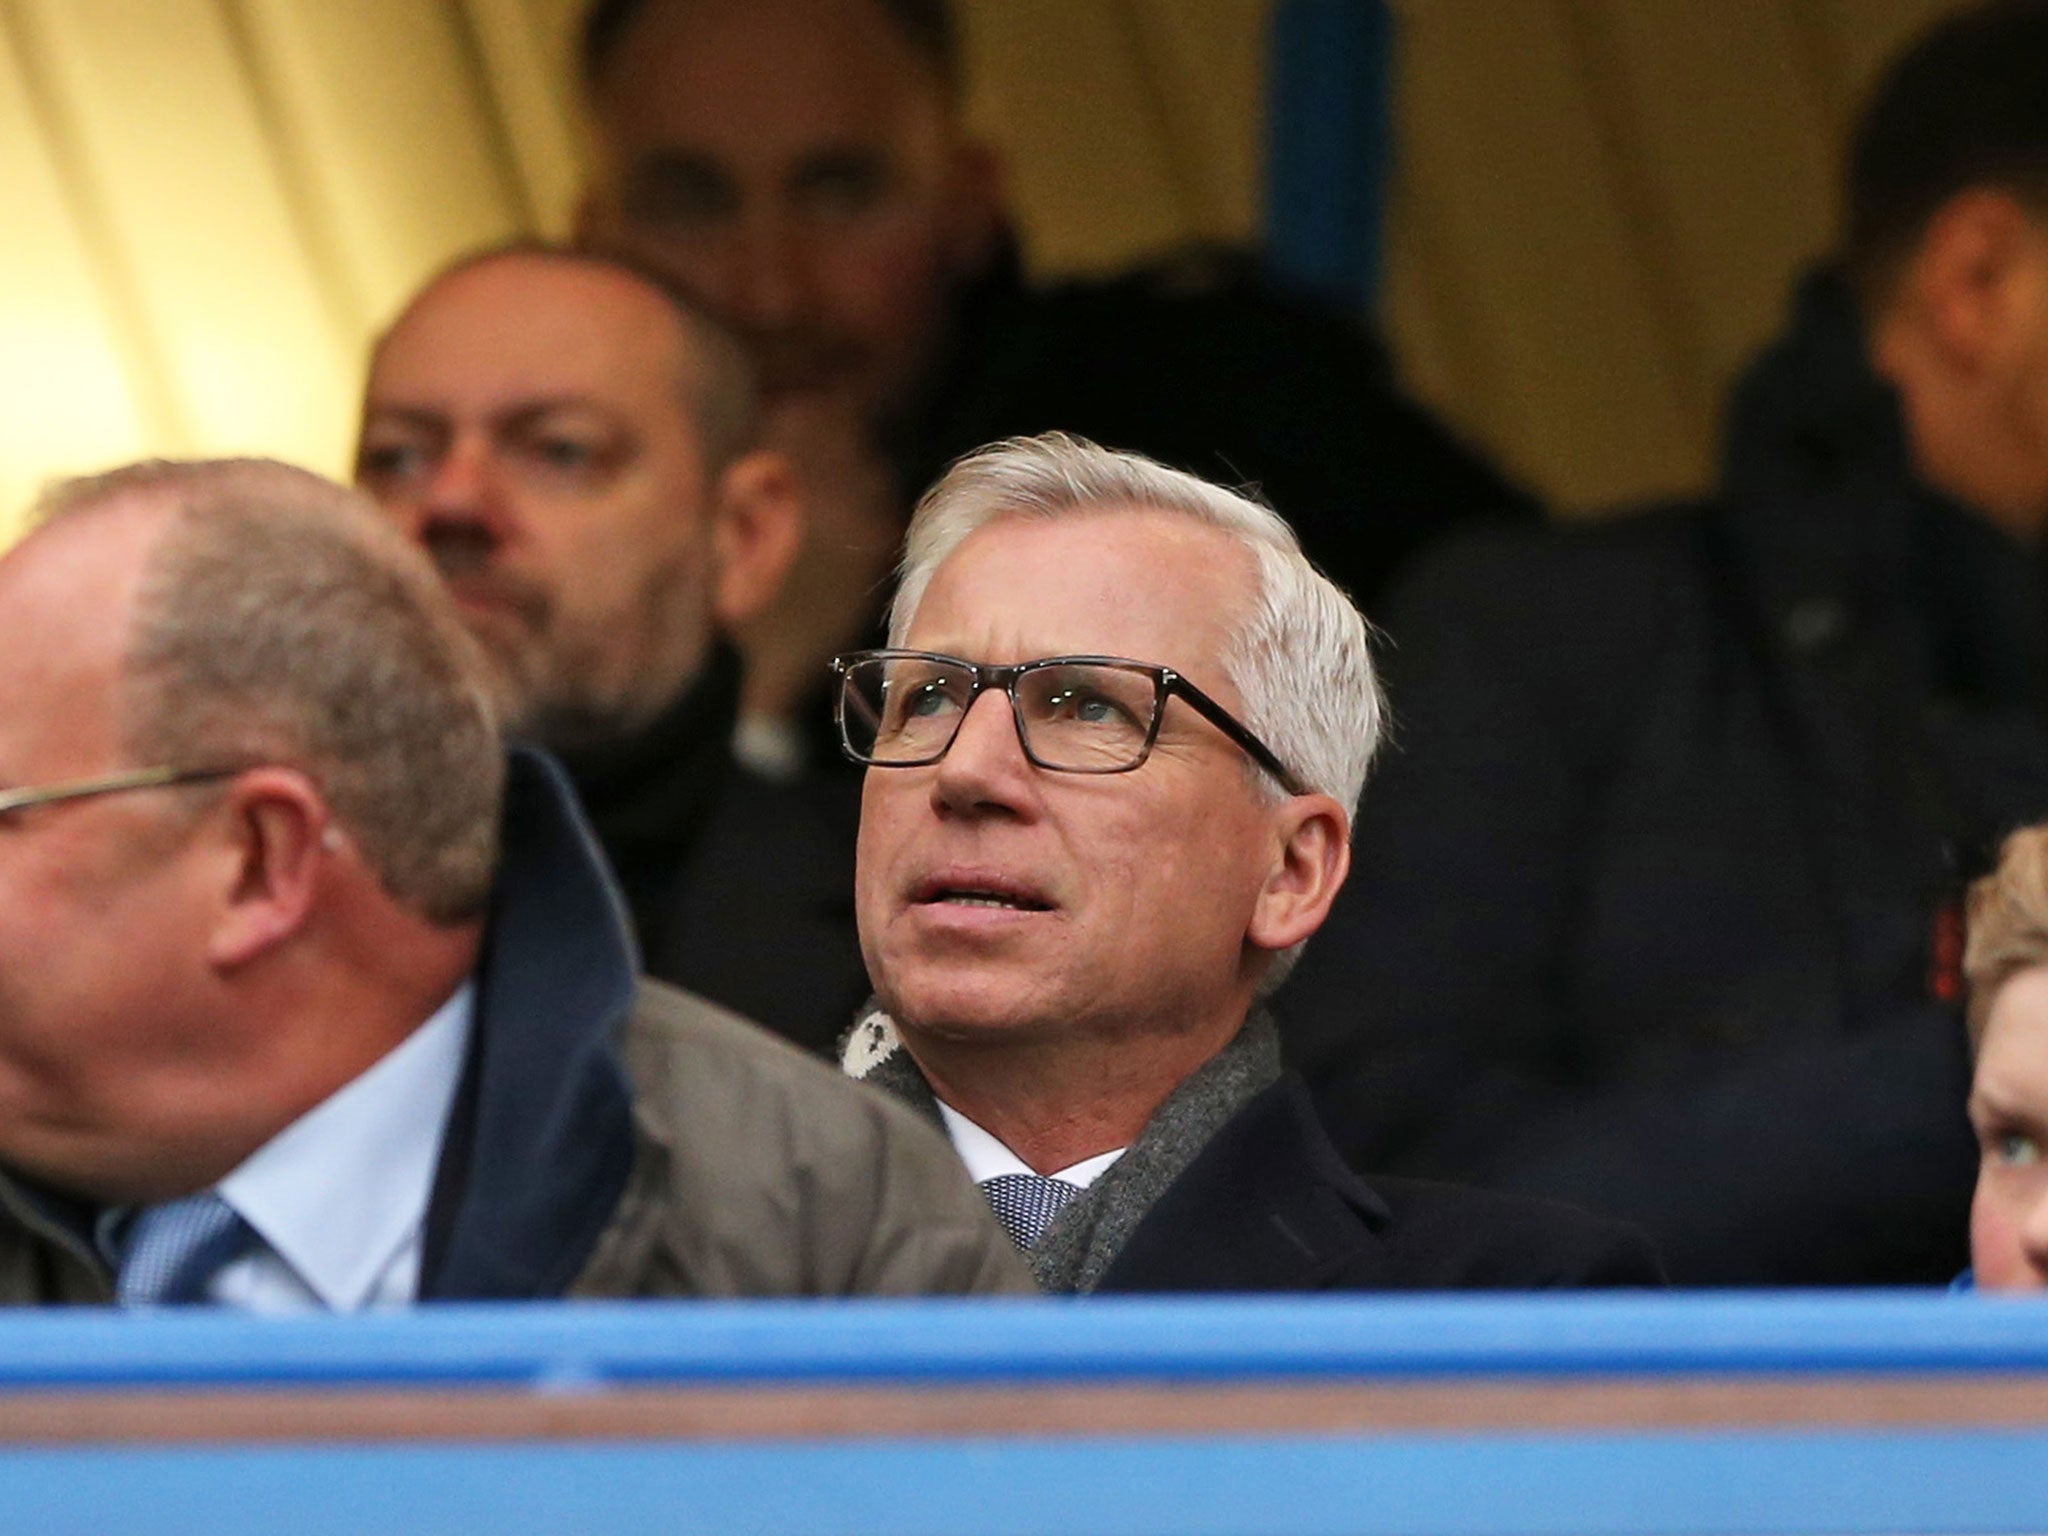 Alan Pardew has been out of work for 11 months